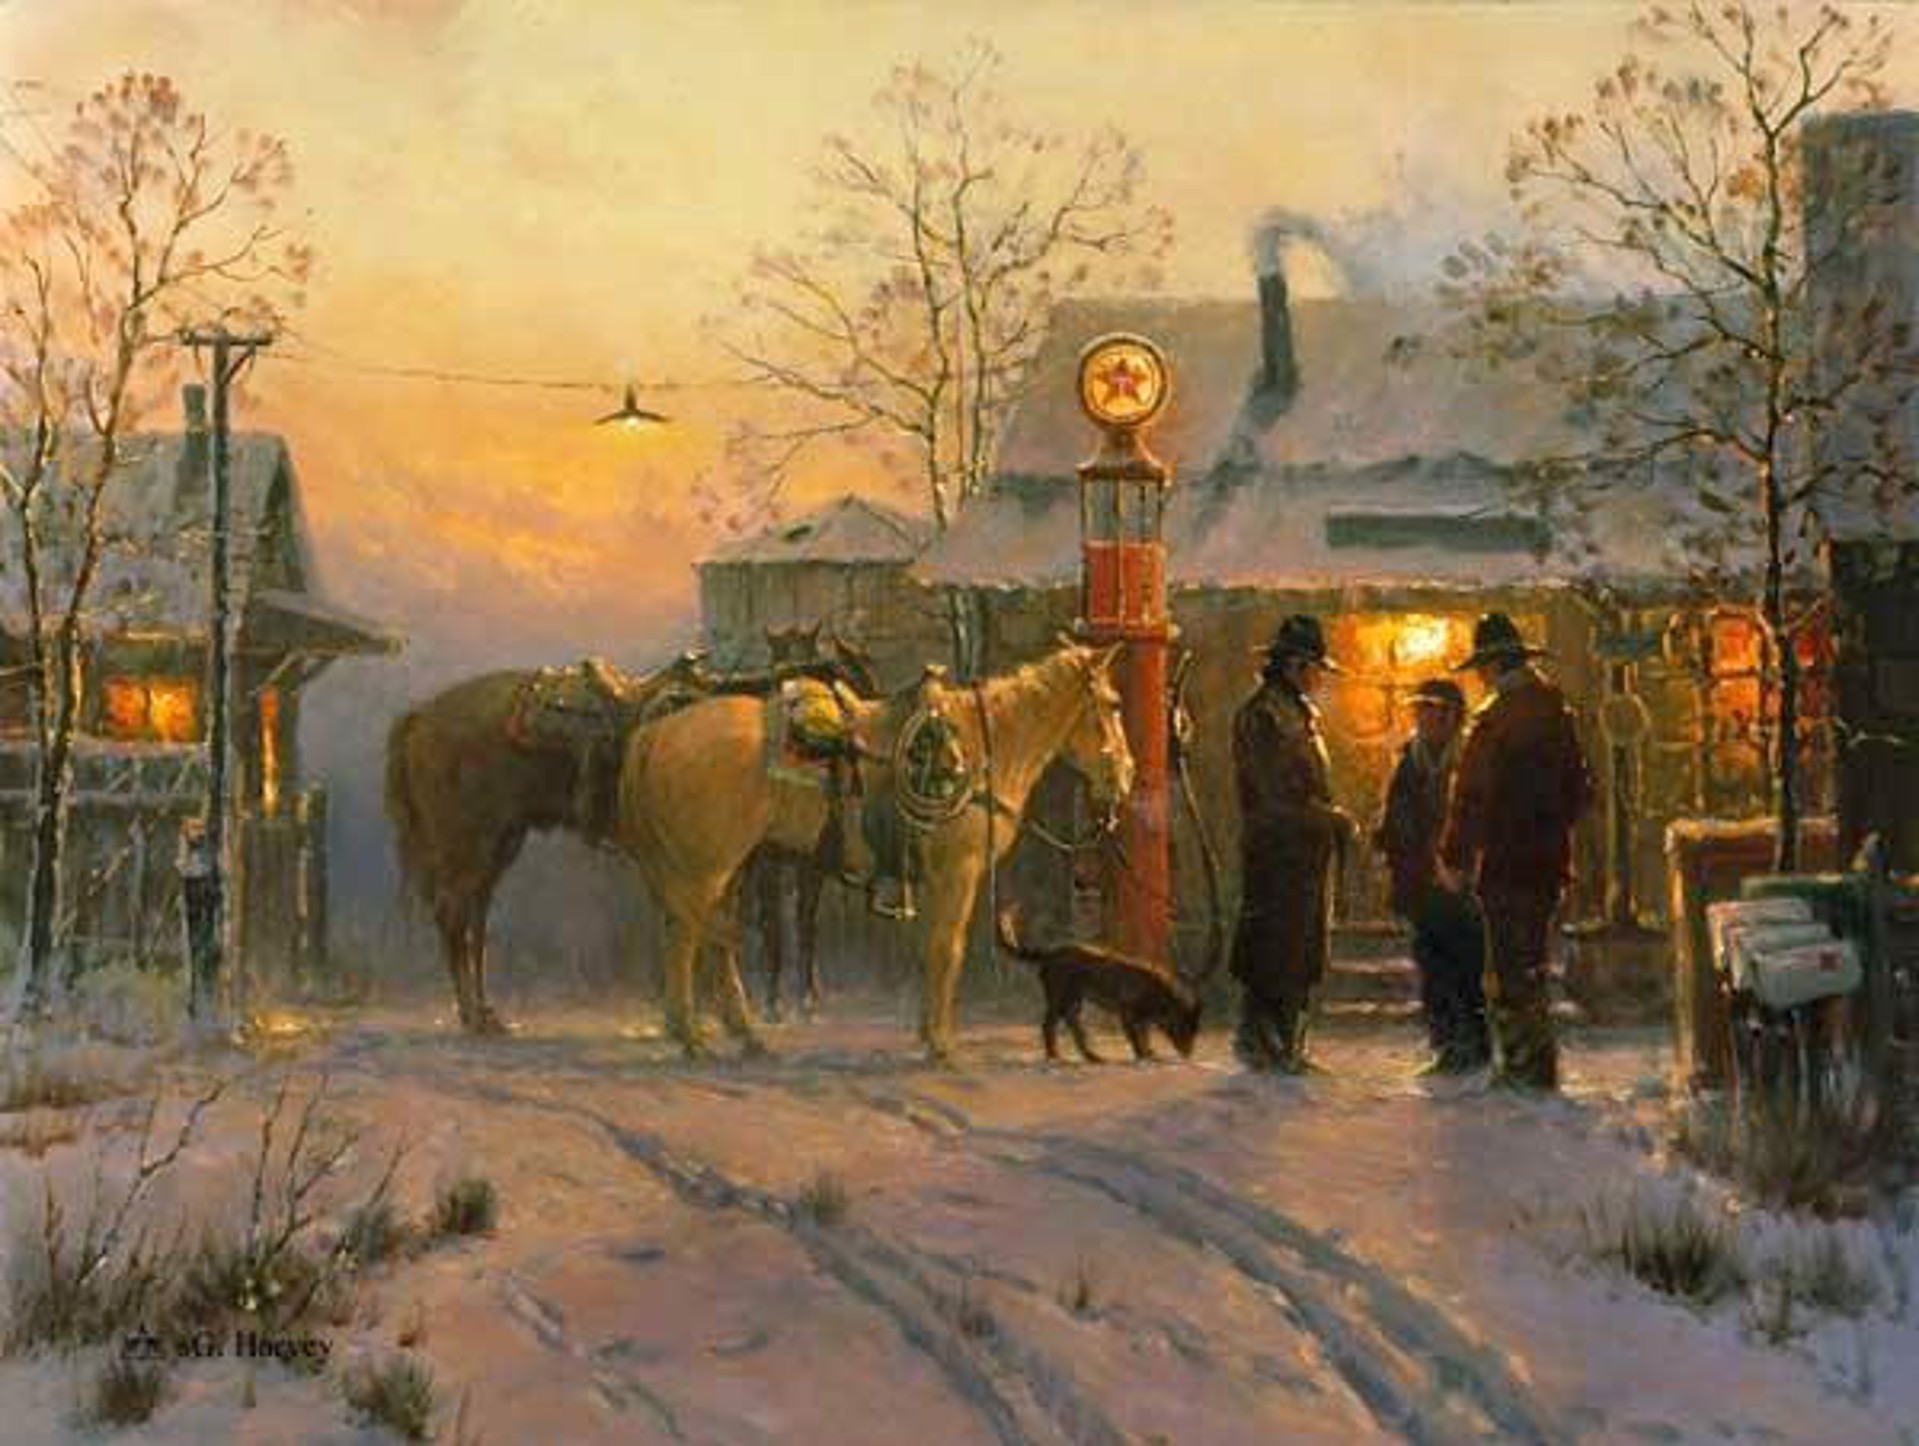 The Warmth of Friendship by G. Harvey